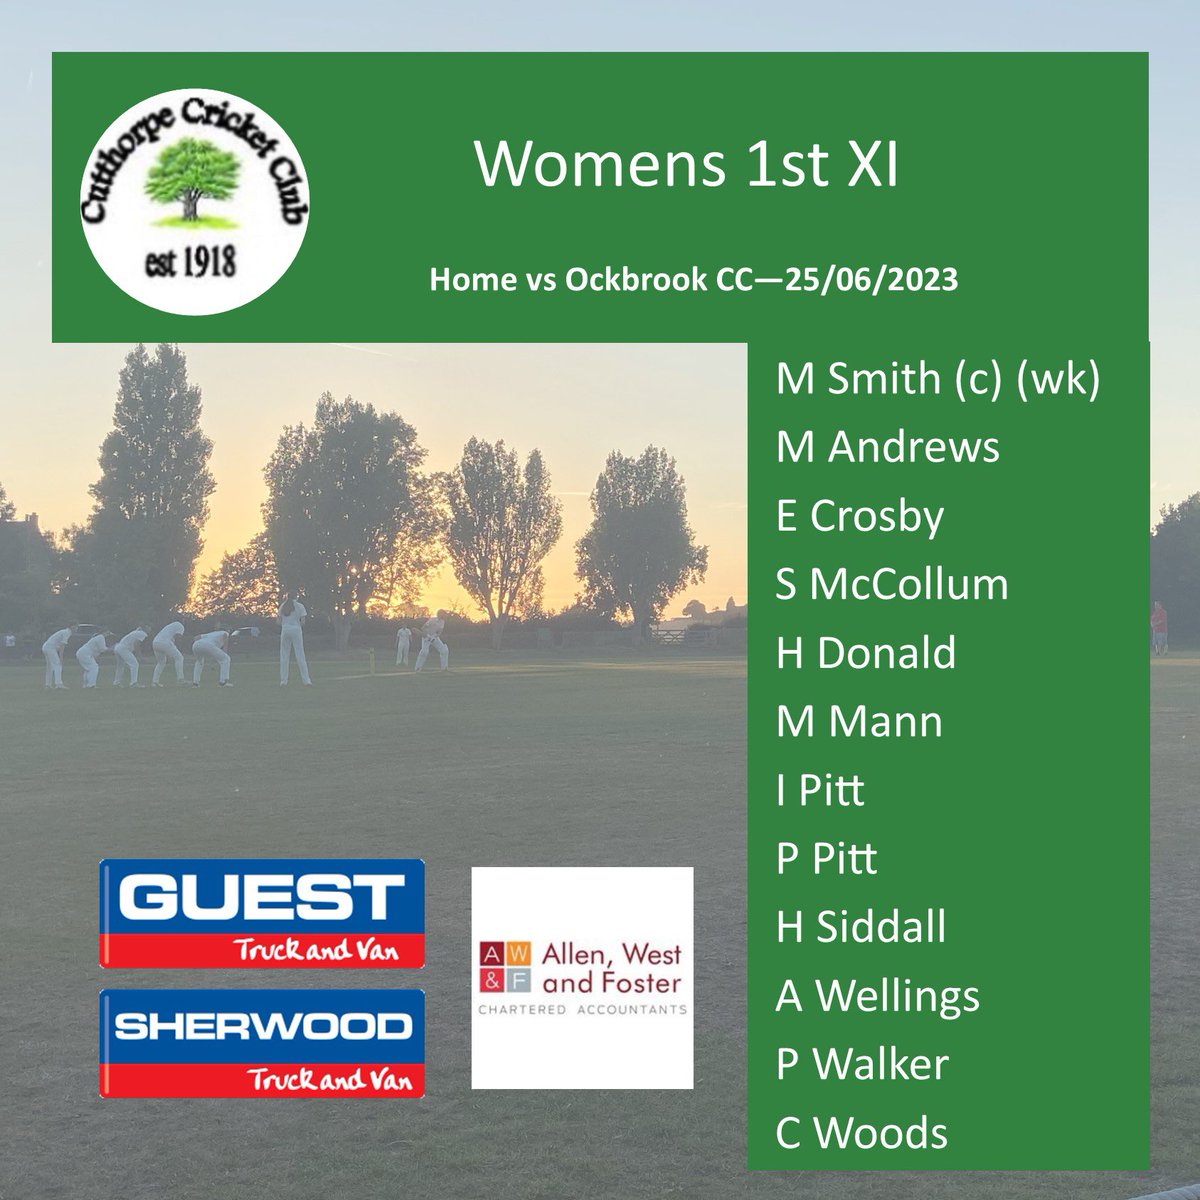 Our Women’s 1st XI take on Ockbrook this weekend at home 🌳